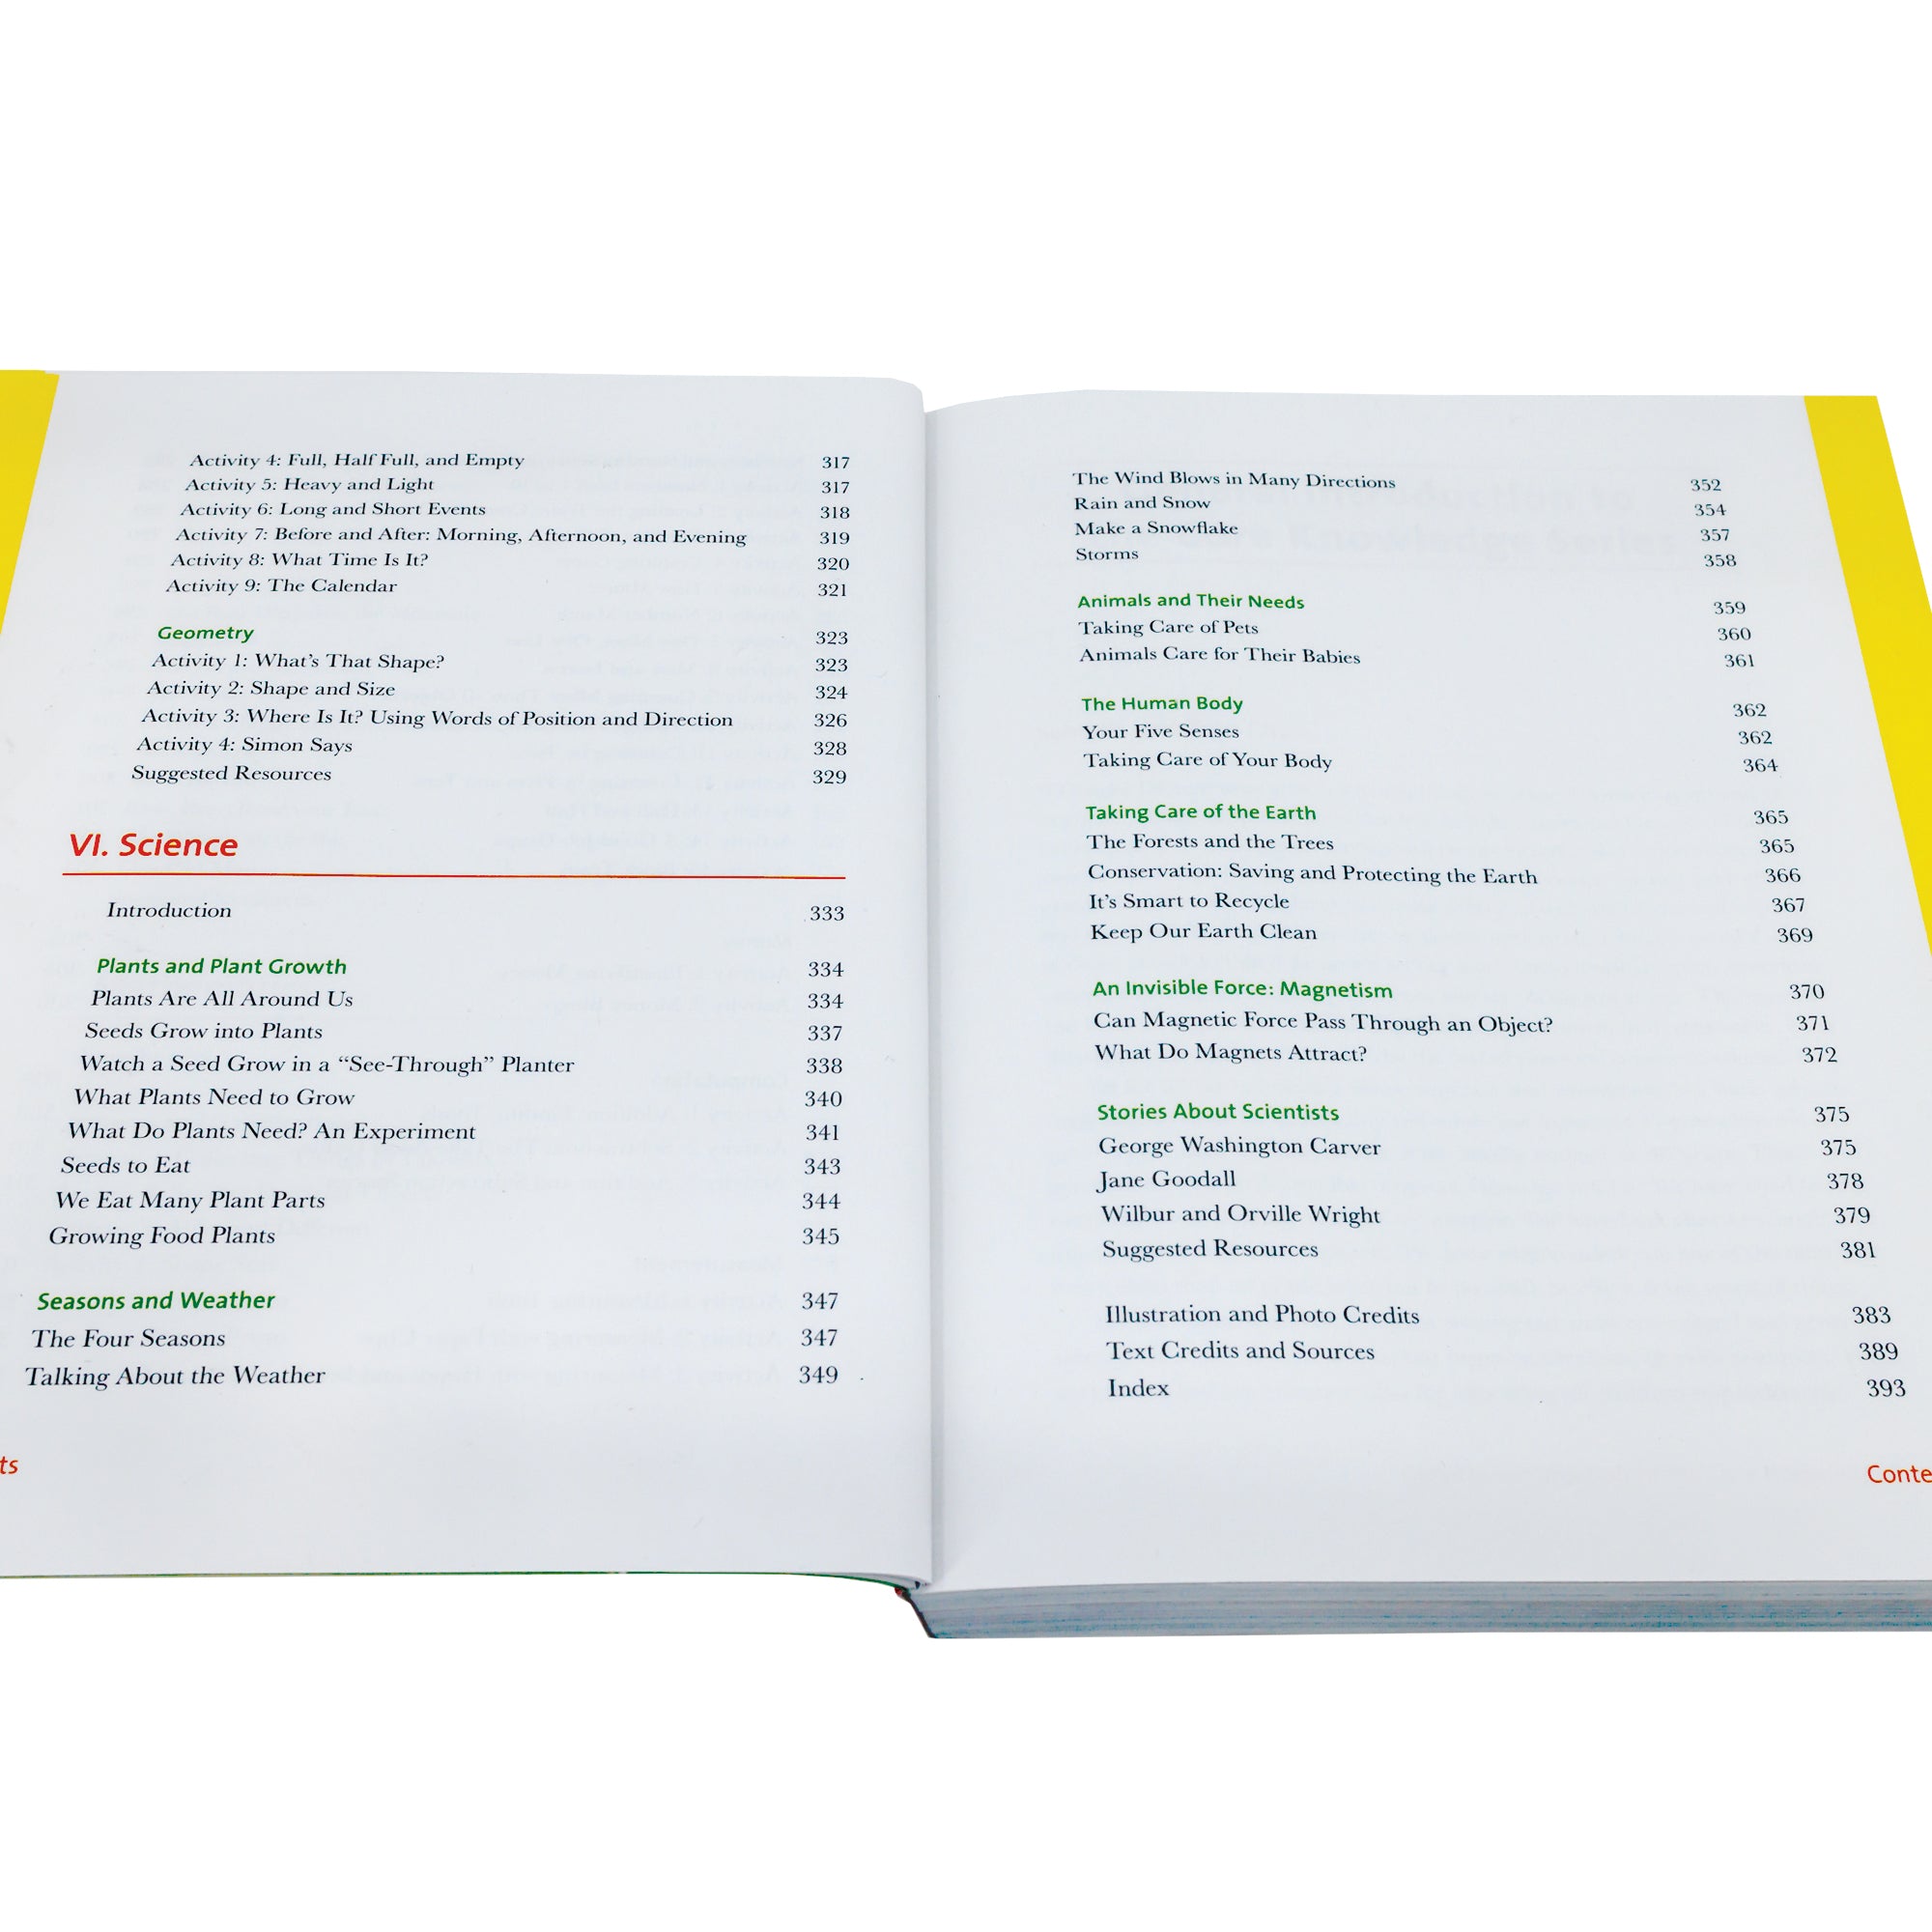 The What Your Kindergartener Needs to Know book open to show the contents on a white page with a yellow boarder along the outsides of the pages. The section titles are in red with green subsection titles and black text below. Section 6 is titled “Science.”